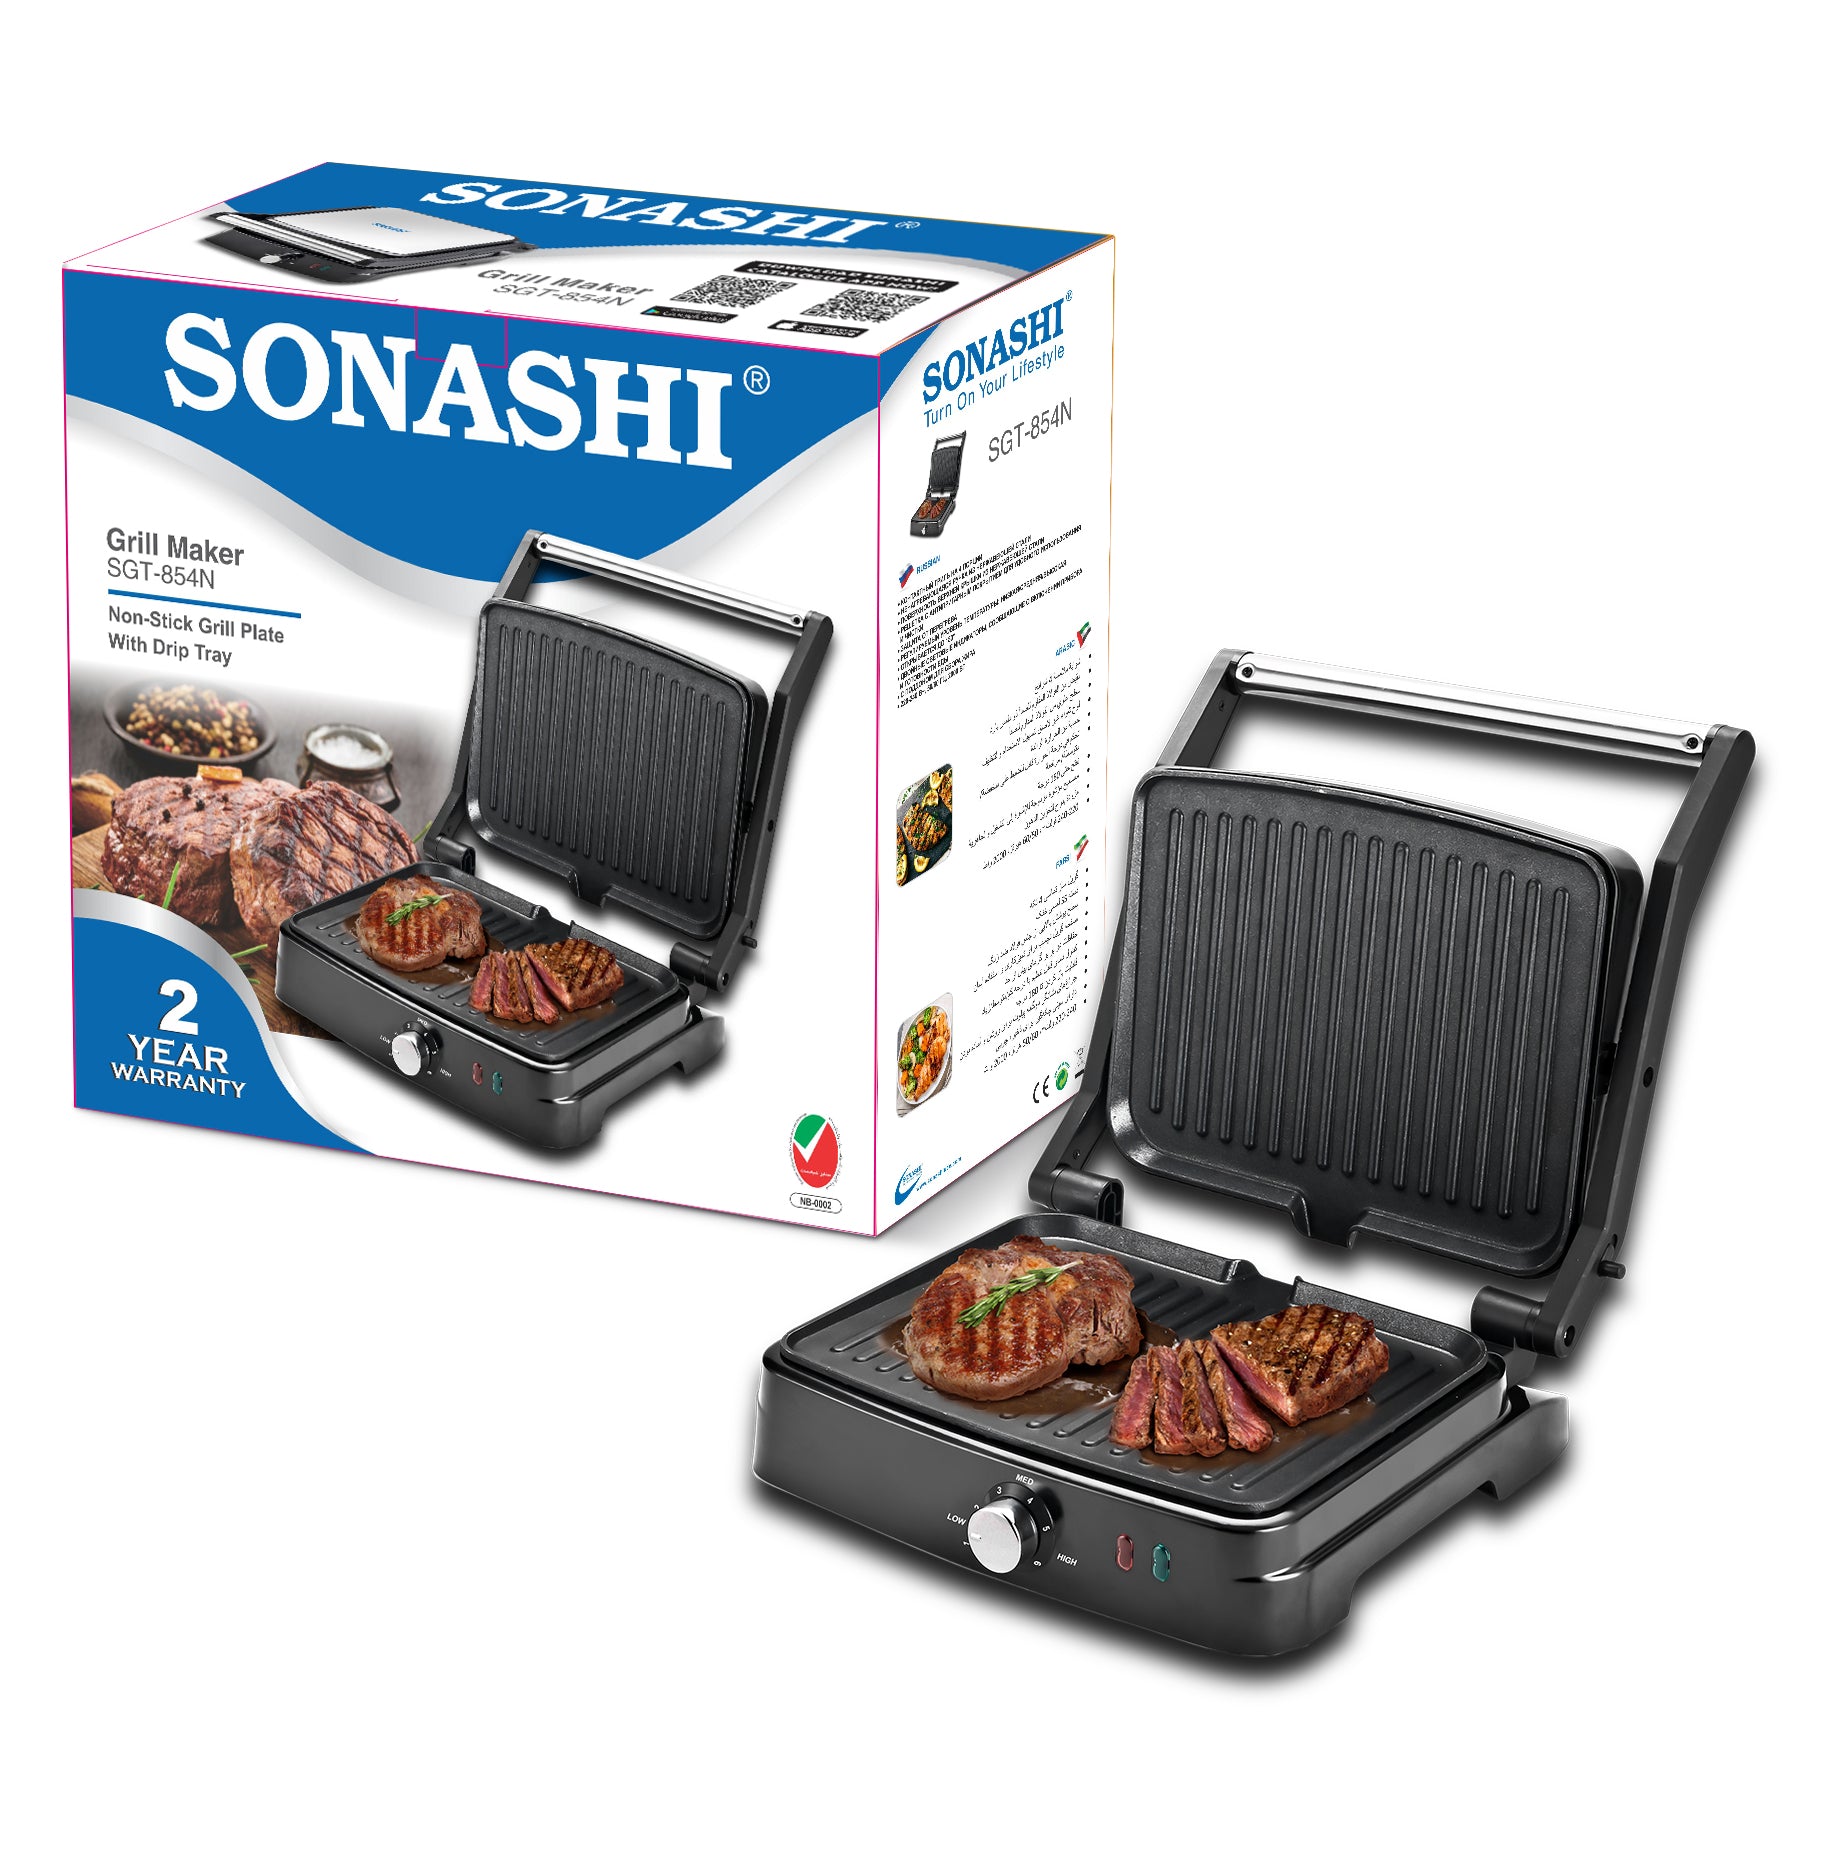 Grill Maker Price